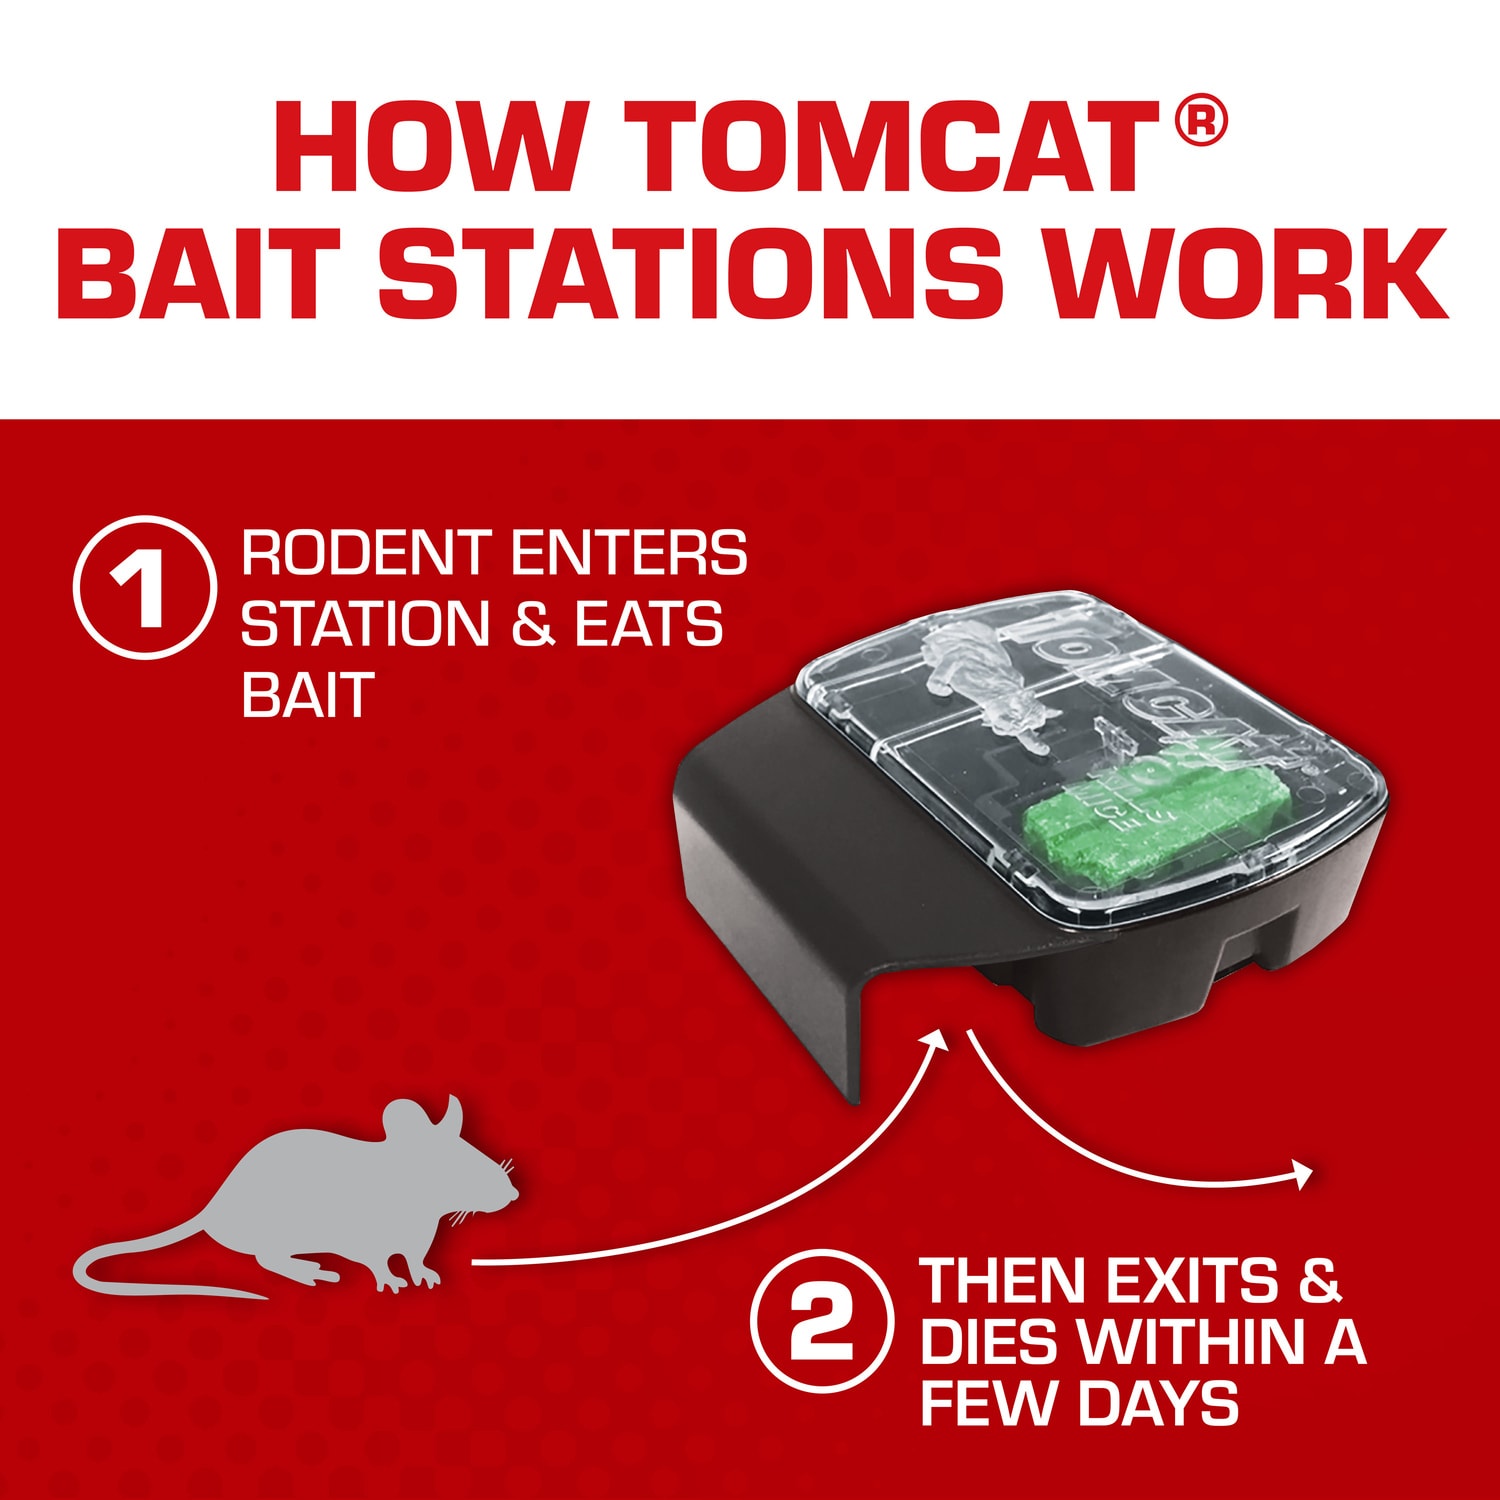 A bait station to control mice and rats - ORKIDA